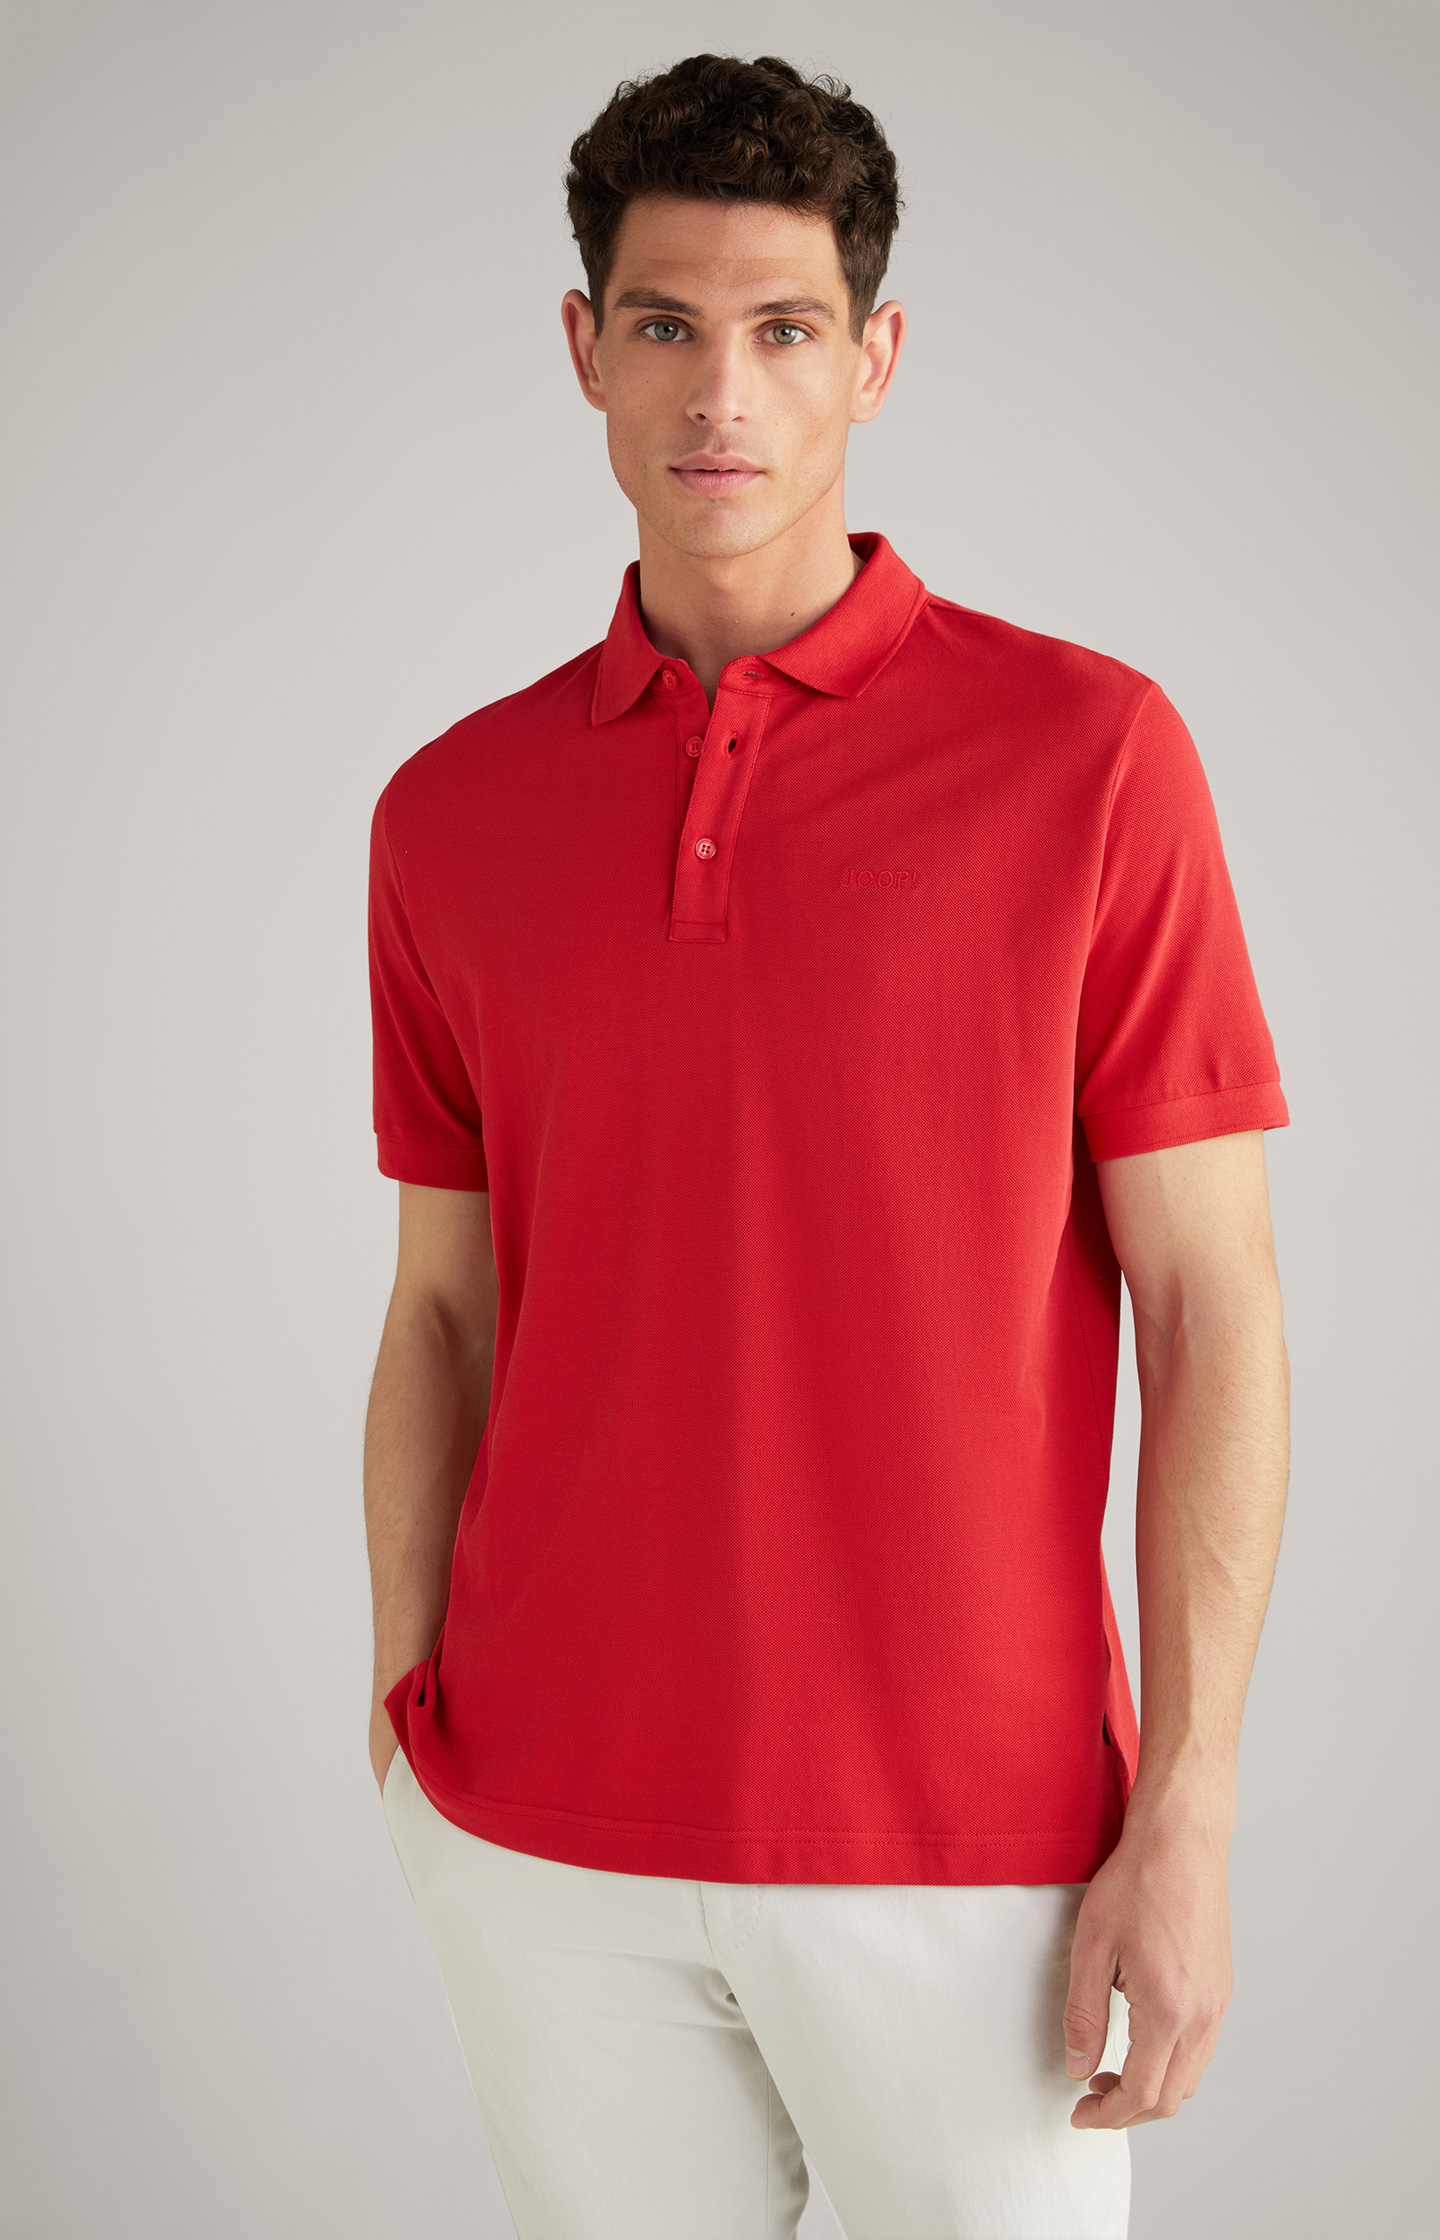 Primus Cotton Polo Shirt in Red - in the JOOP! Online Shop